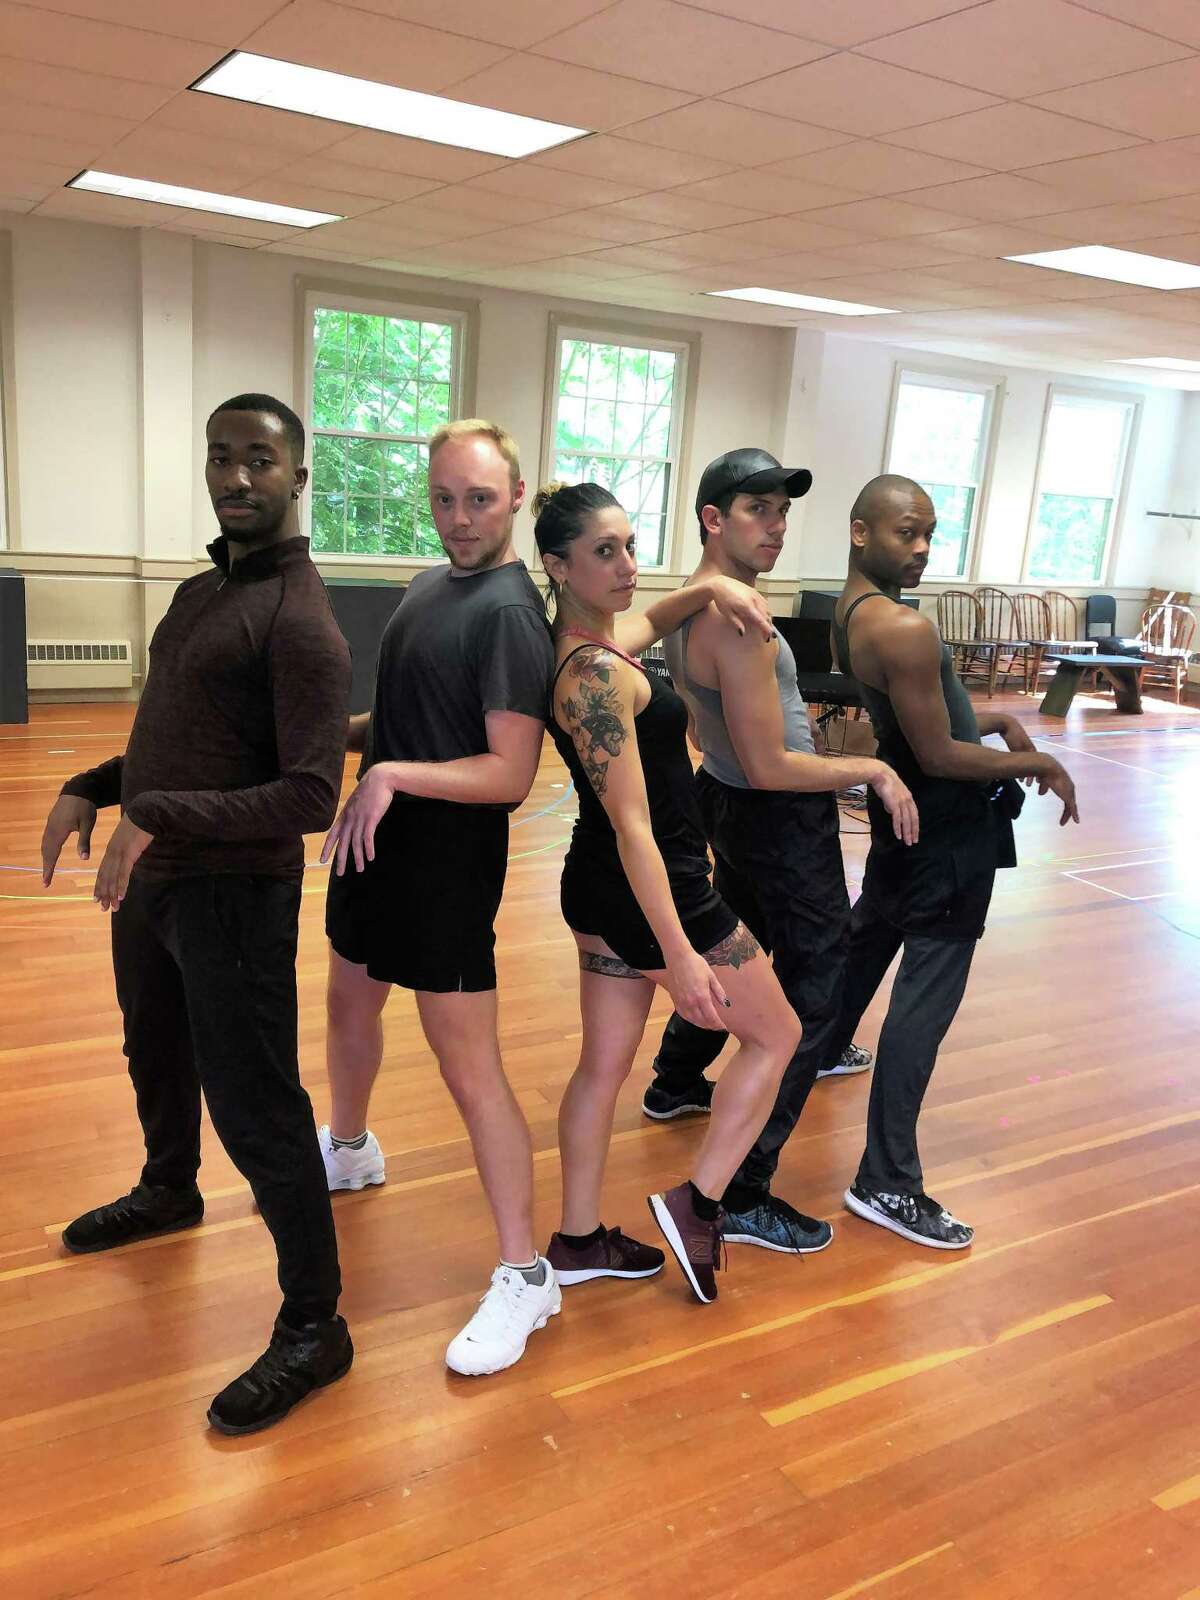 LIFE’S A CABARET: From left, Amani Pope, Jayke Workman, Katie Mack, Max Weinstein and Taavon Gamble star in Ivoryton Playhouse’s new production of “Cabaret,” running Aug. 7 to Sept. 1. Tickets are $20-$55. Call 860-767-7318 or visit ivorytonplayhouse.org.